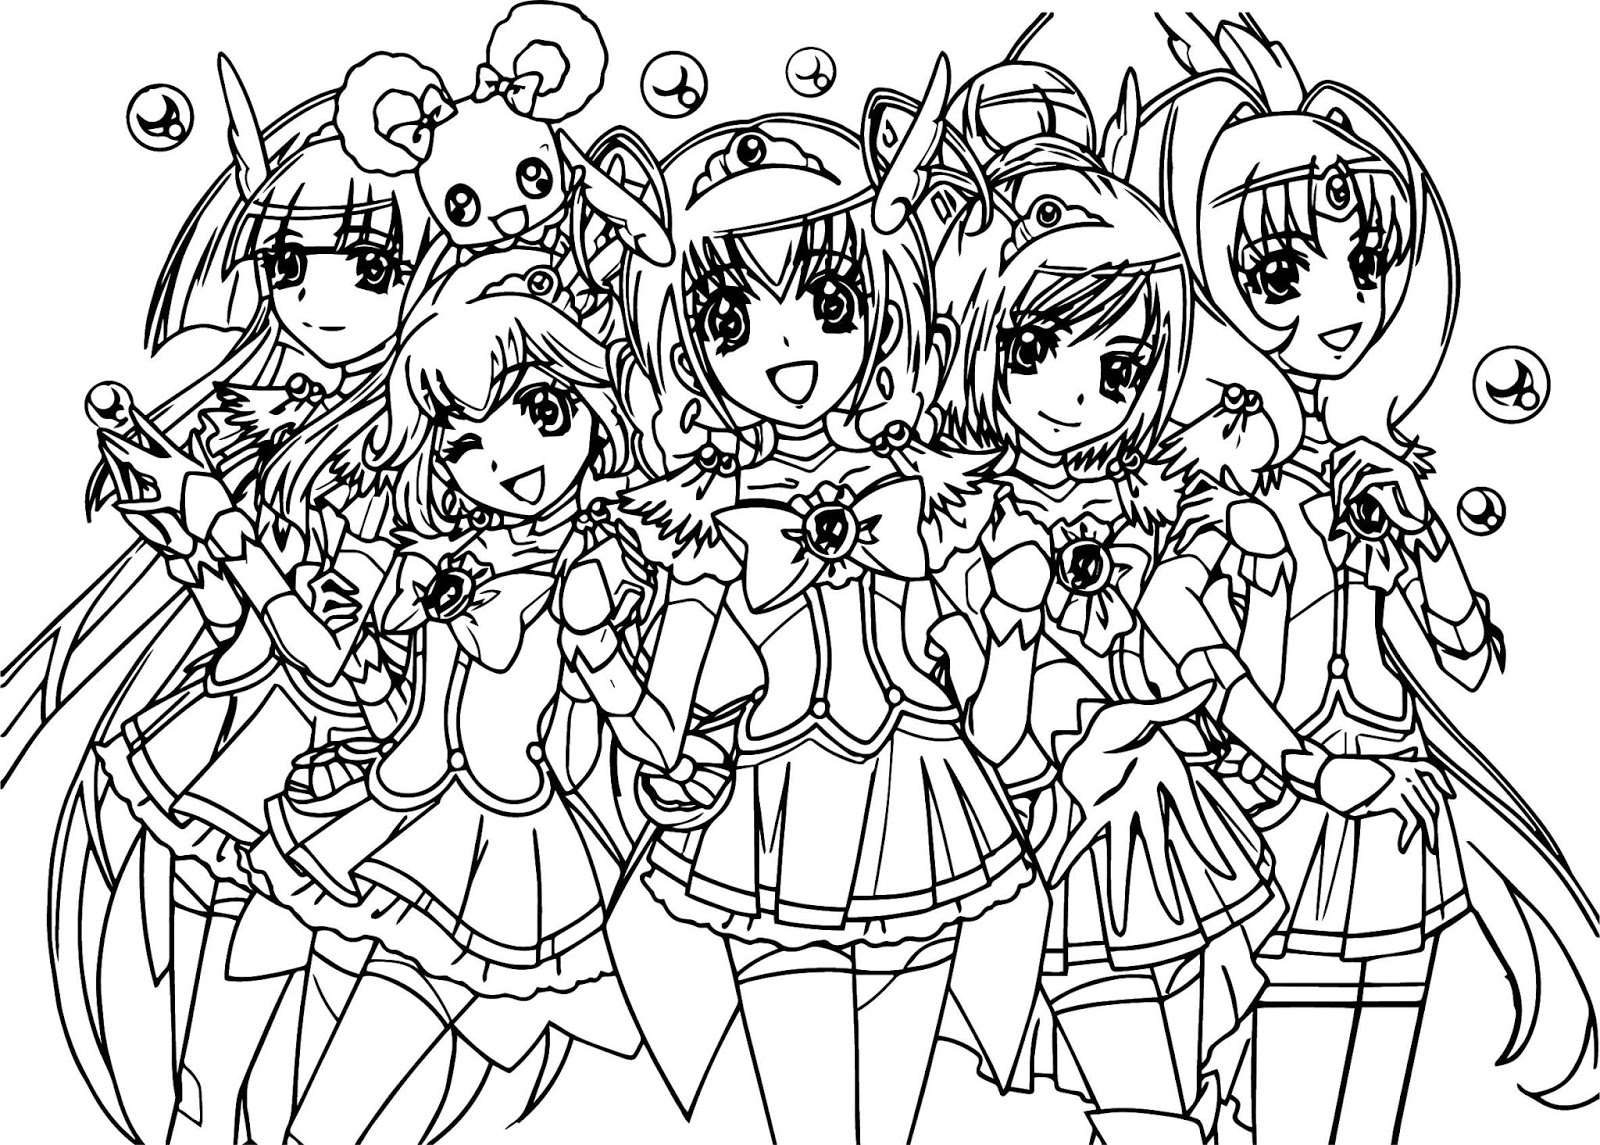 Glitter Force Coloring Pages - Free Printable Coloring Pages for Kids